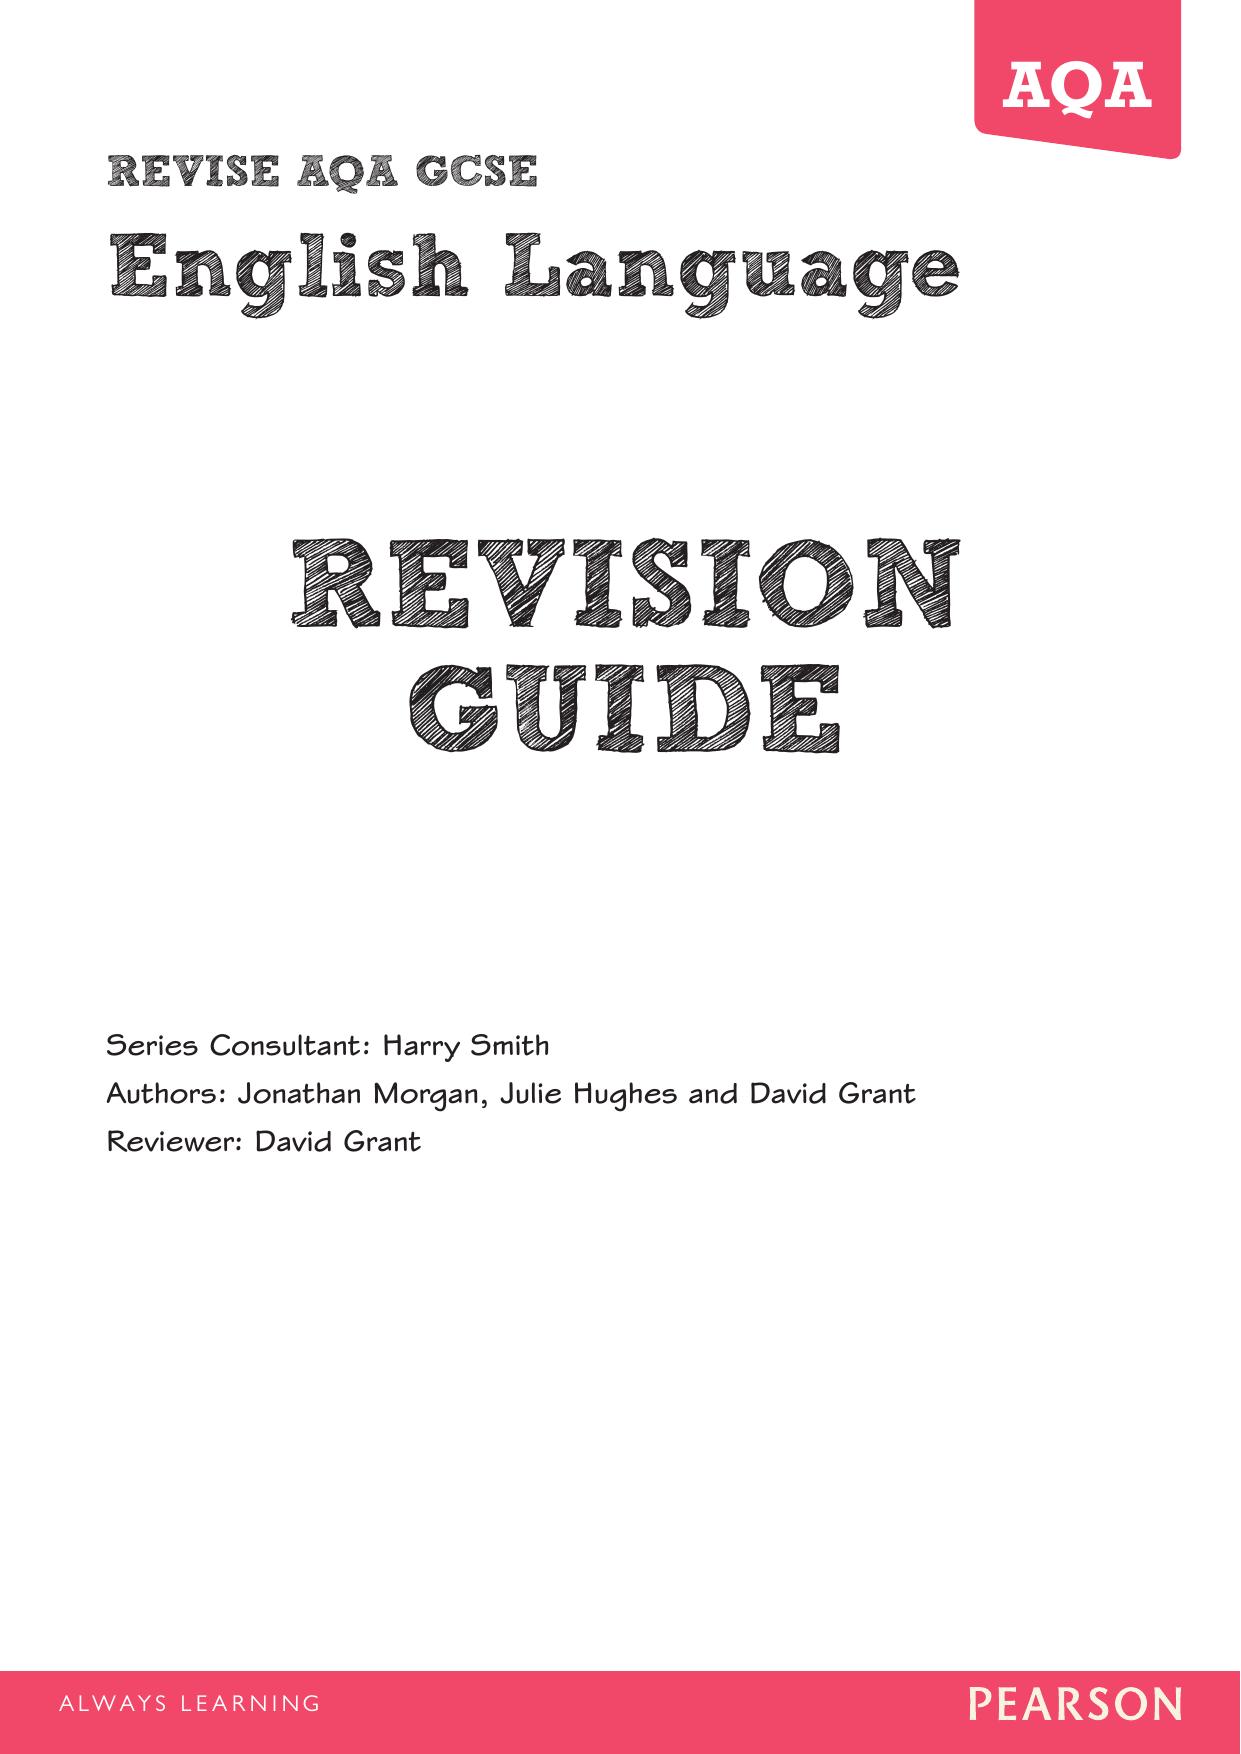 REVISE AQA GCSE English Language Revision Guide: For the New 2015 Qualifications